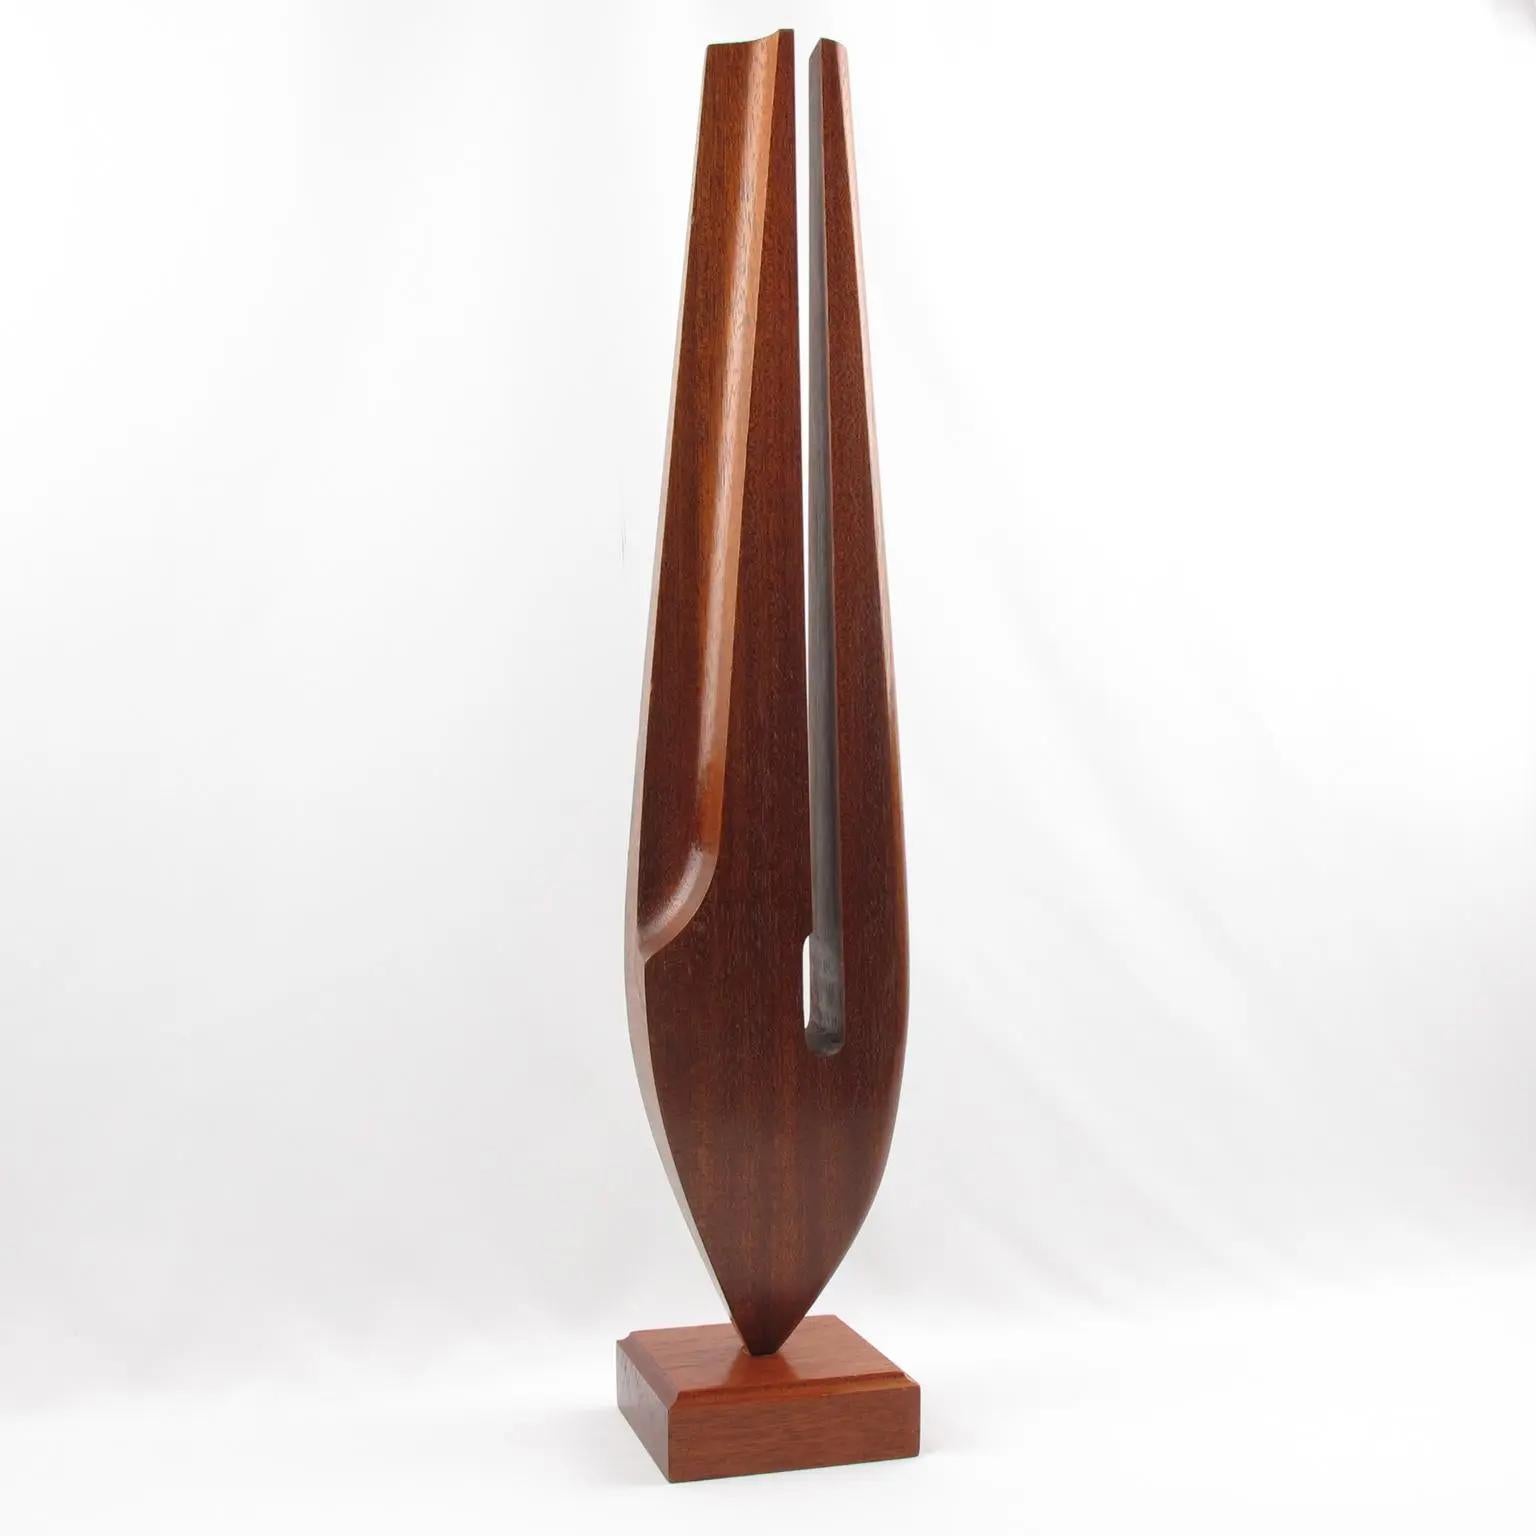 Modern Architectural Wooden Ornament Sculpture Tuning Fork For Sale